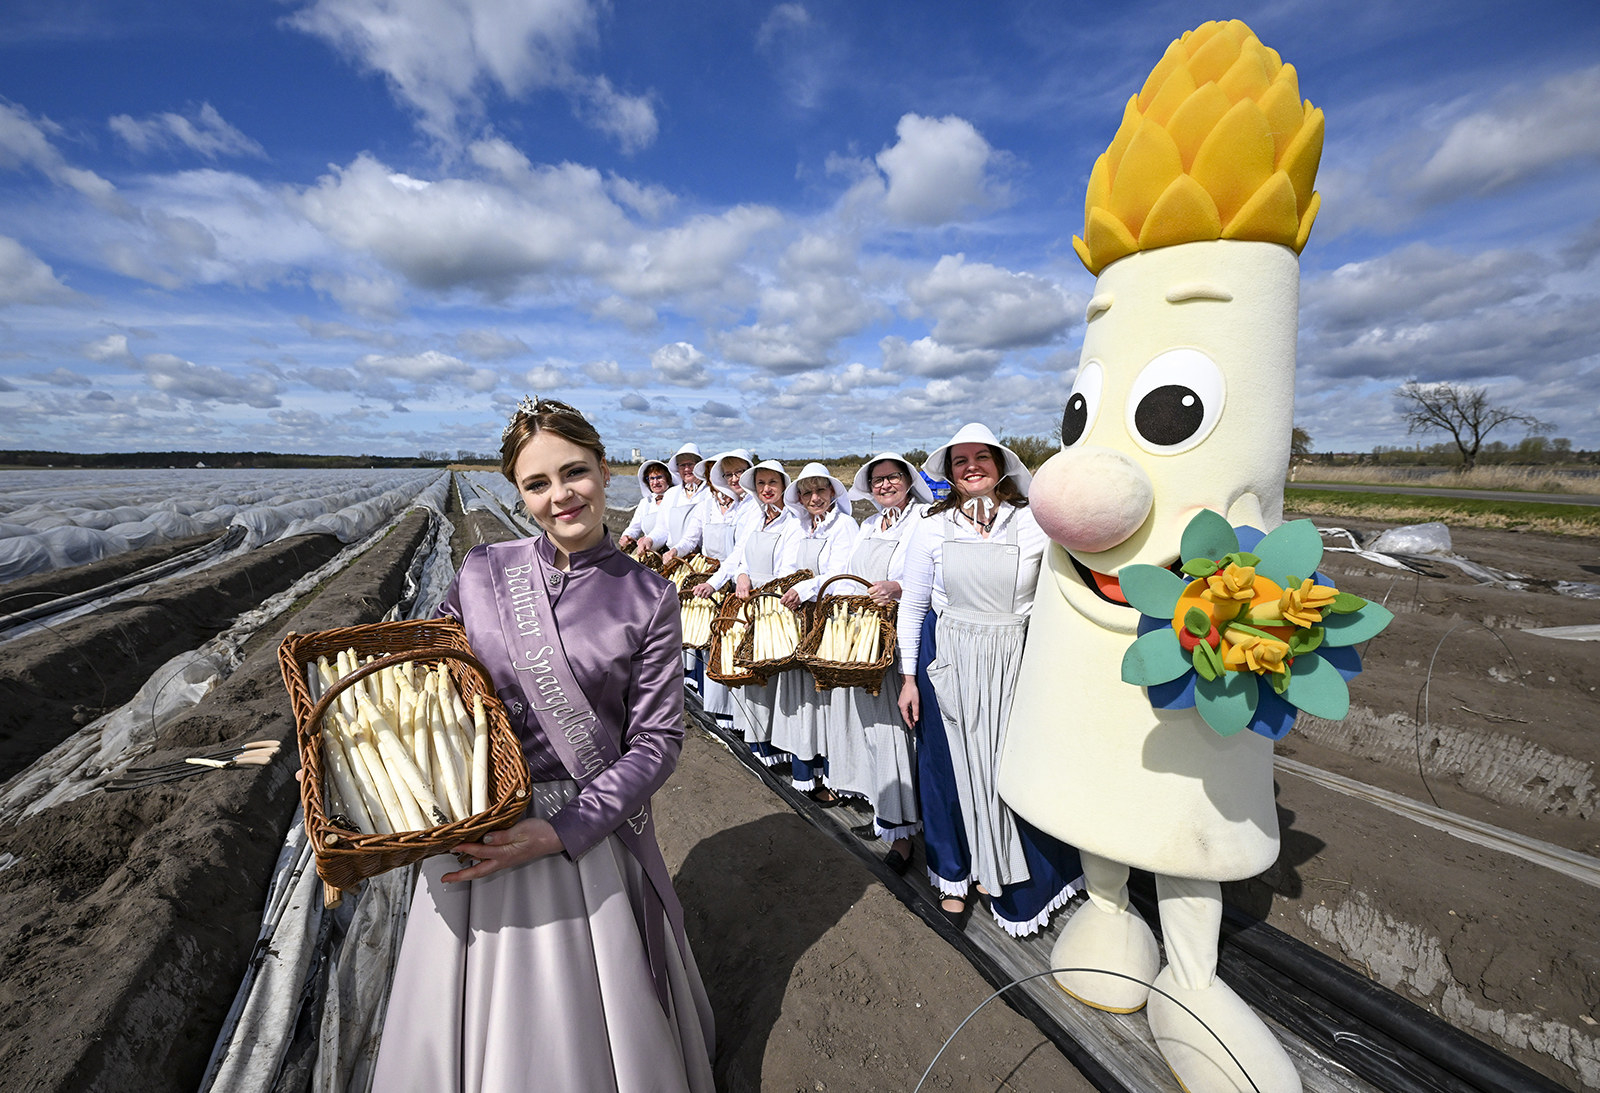 the asparagus queen stands holding a basket of asparagus next to an asparagus mascot and other women holding asparagus